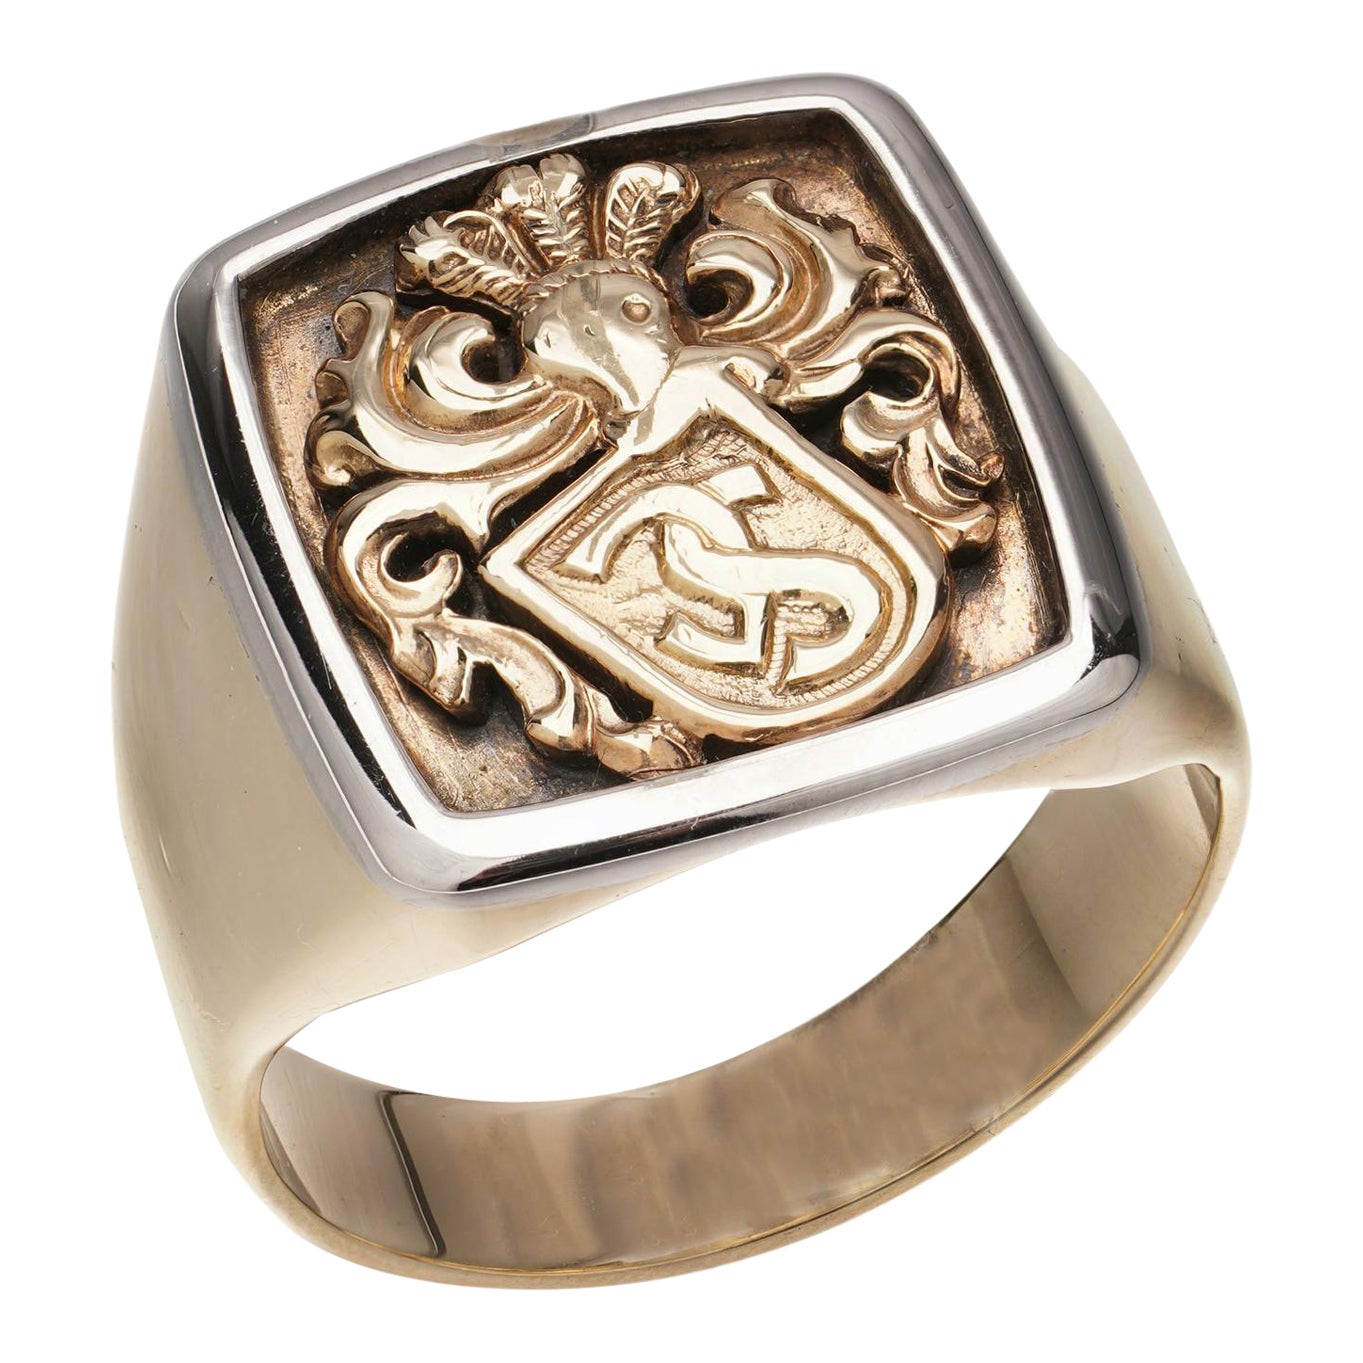 Vintage 9kt. Yellow and white gold  Signet Ring with Coat of Arms